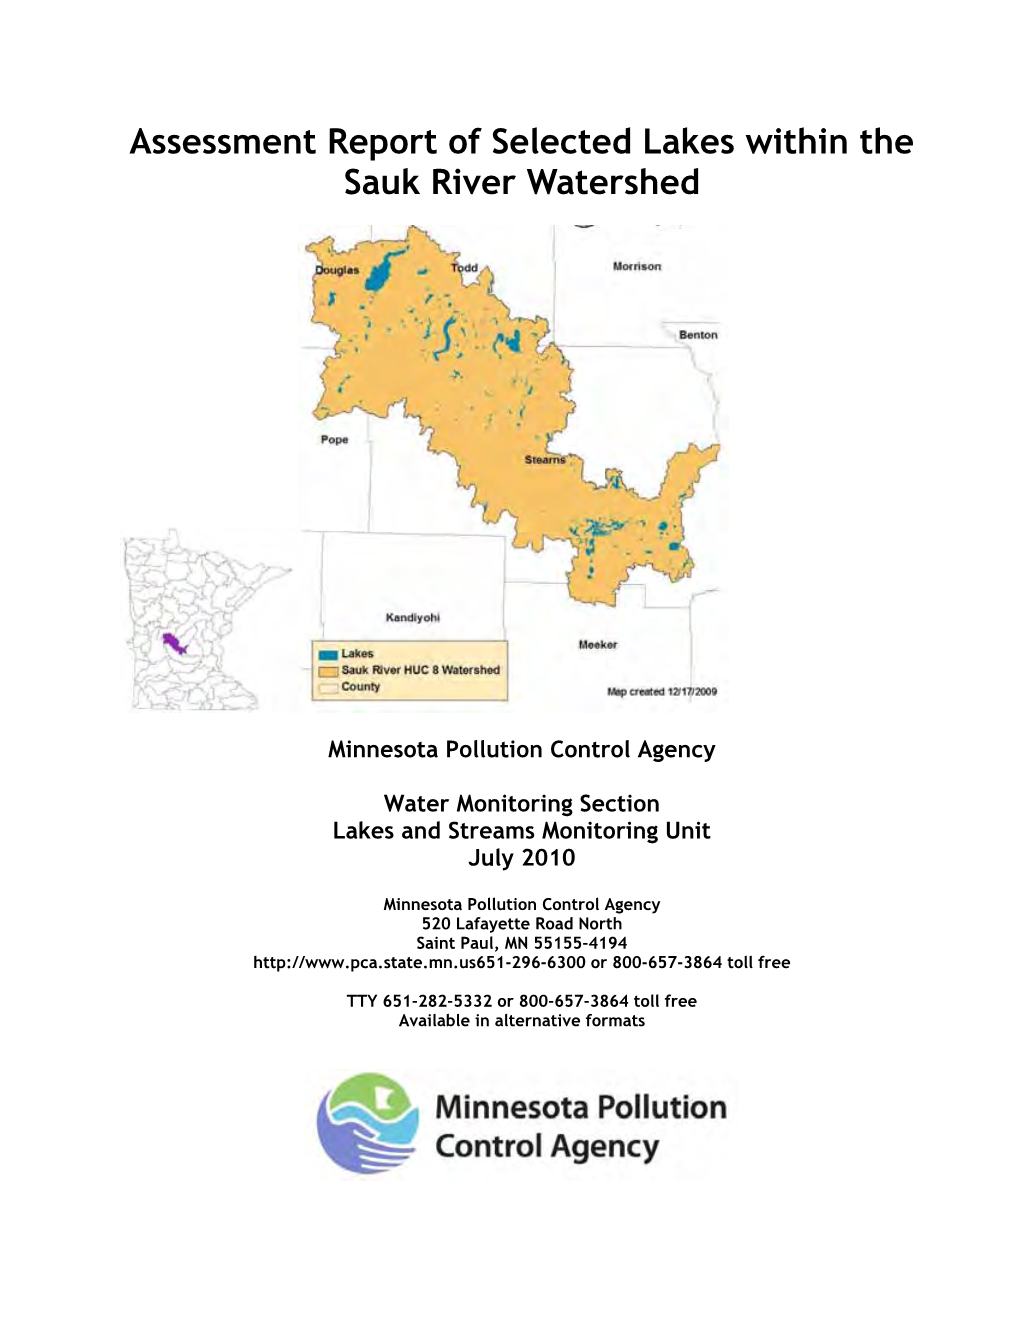 Assessment Report of Selected Lakes Within the Sauk River Watershed